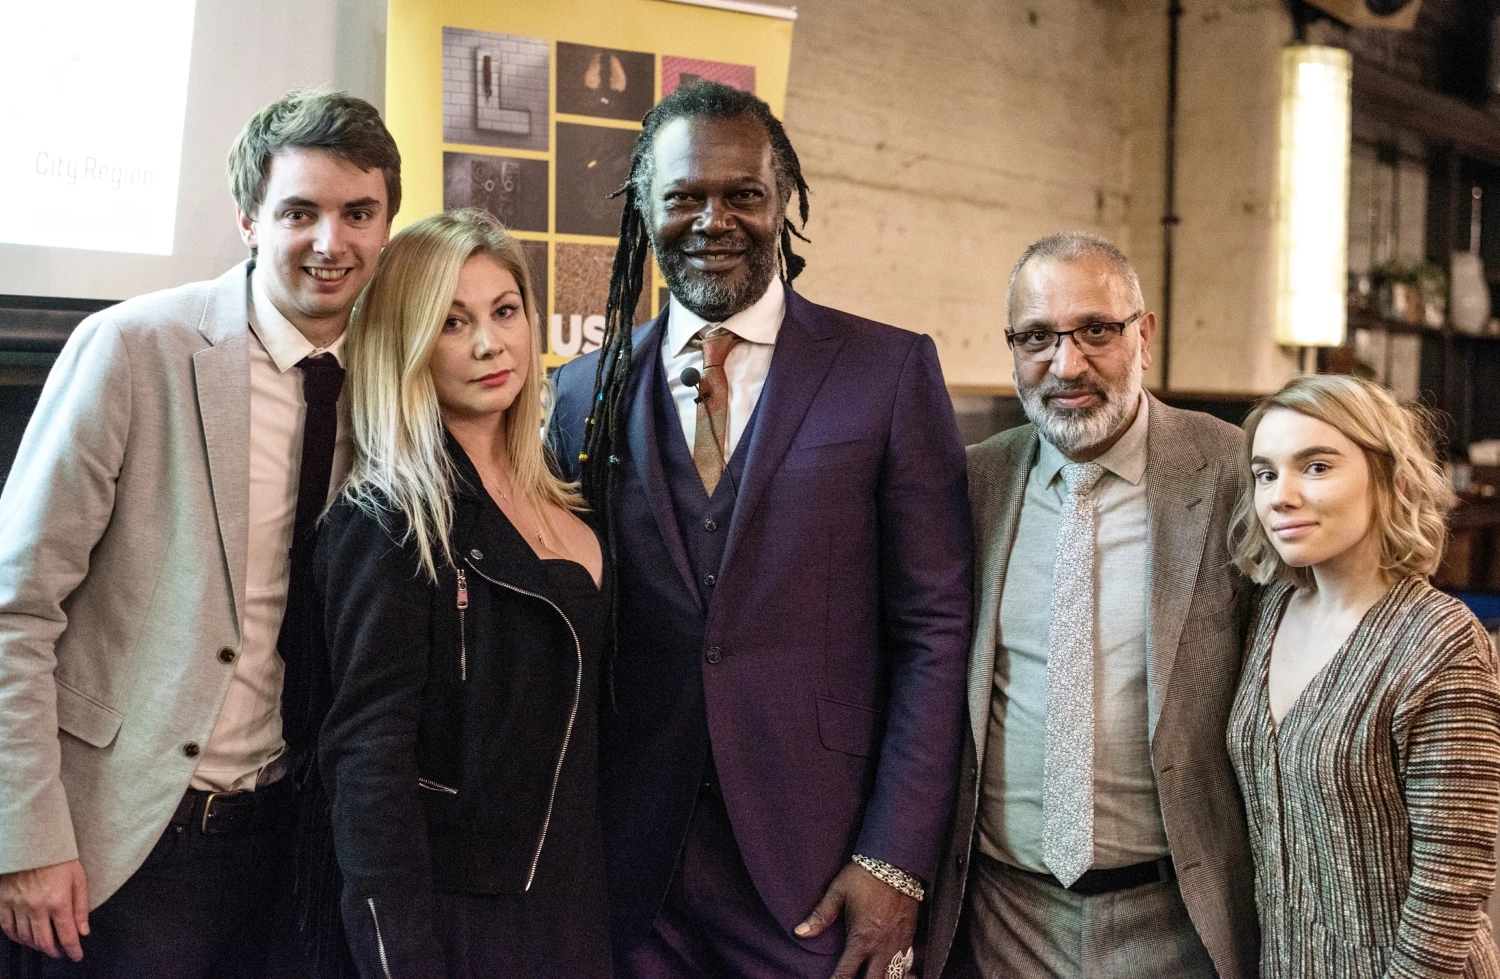 Levi Roots with the Launchpad Mentoring team